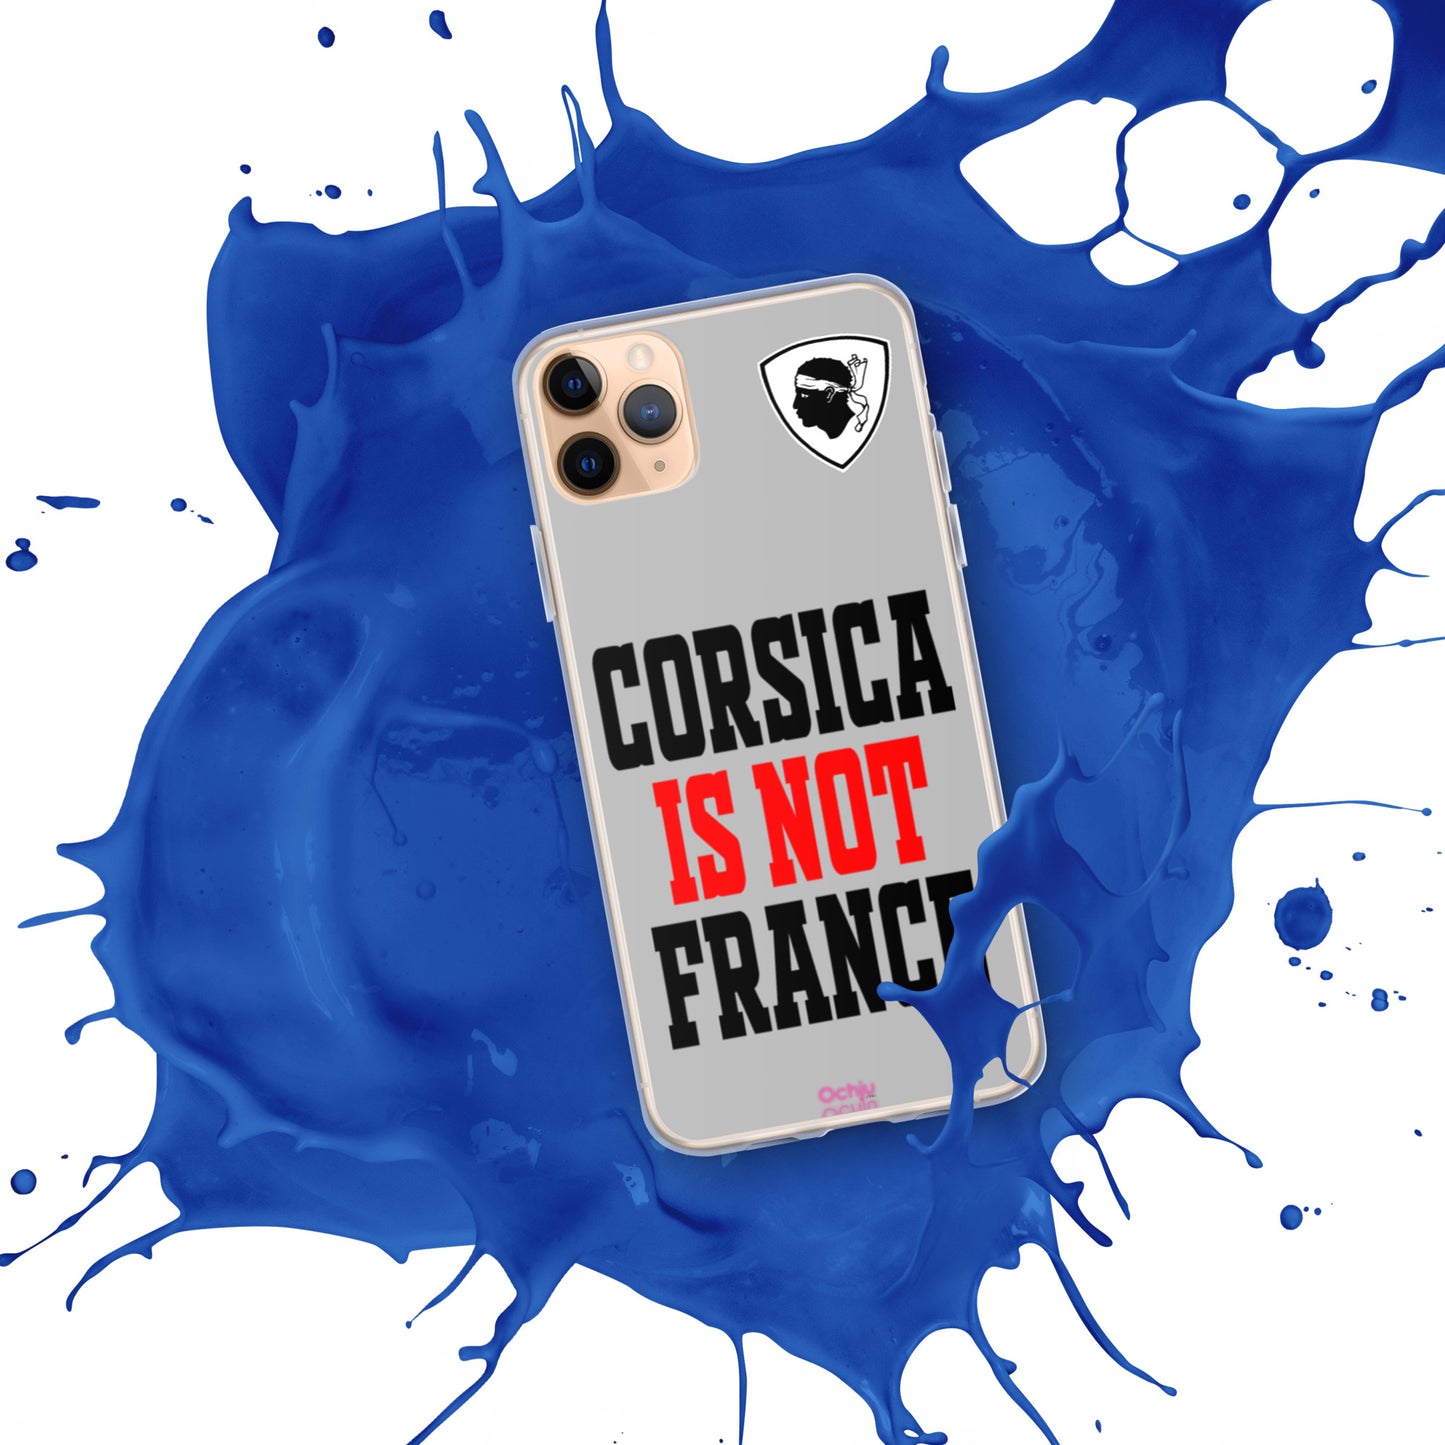 Coque pour iPhone Corsica is not France - Ochju Ochju iPhone 11 Pro Max Ochju Coque pour iPhone Corsica is not France